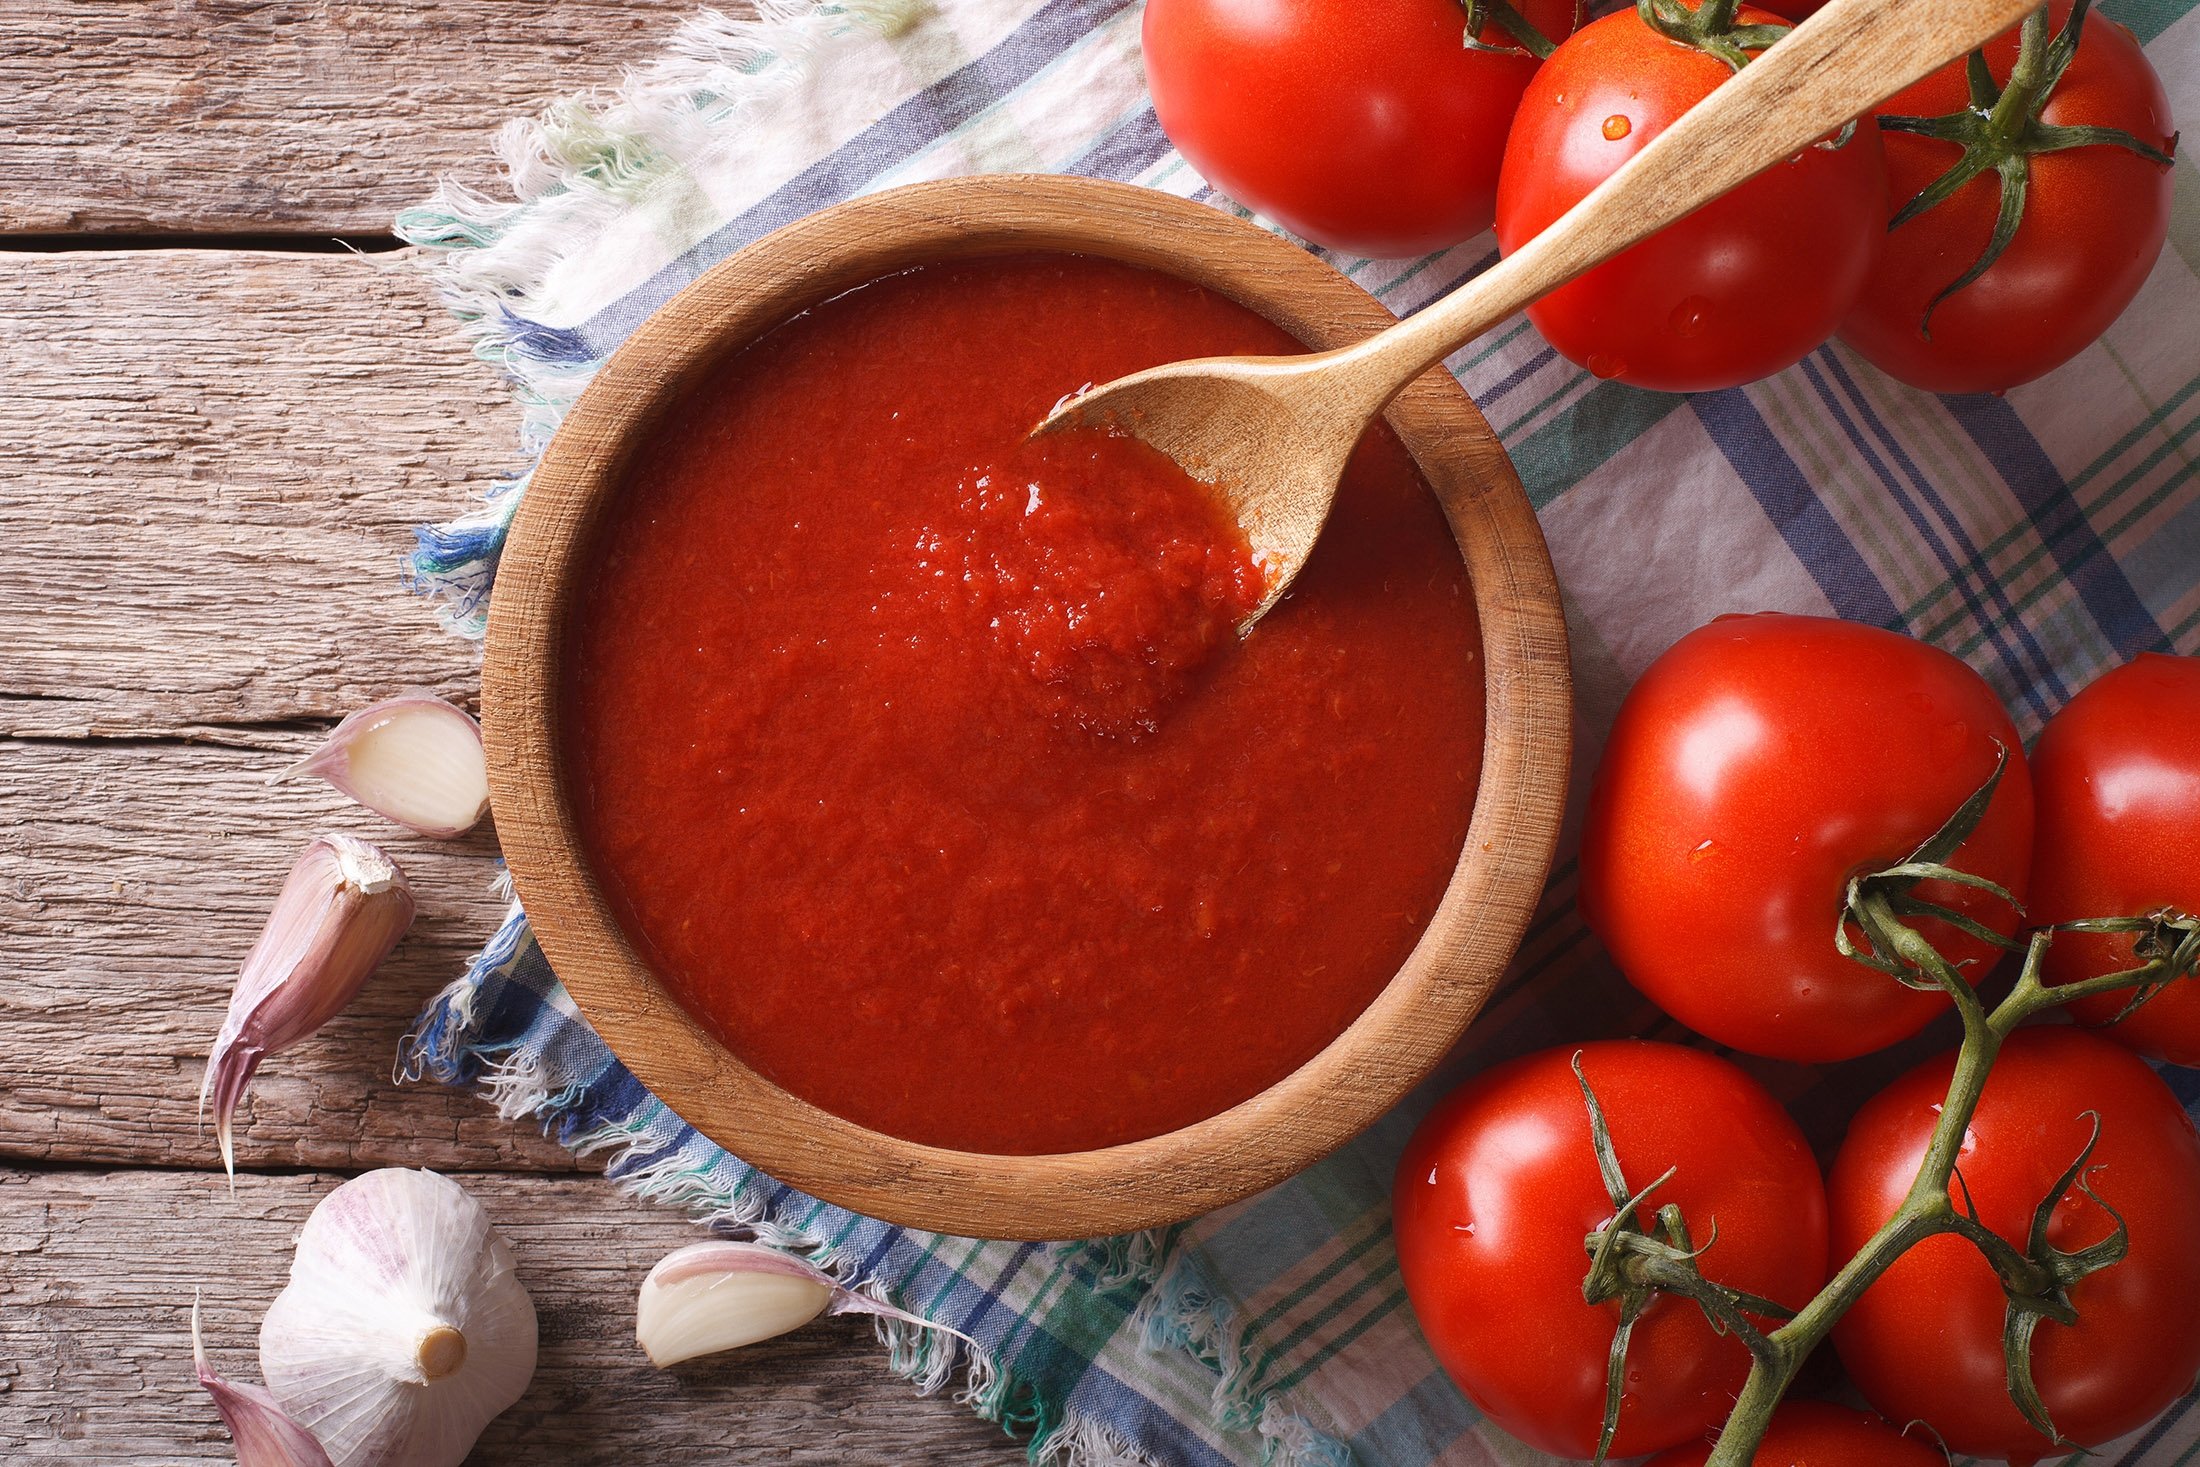 Salça is the Turkish word for the wonderful tomato and red pepper pastes produced in the country. (Shutterstock Photo)